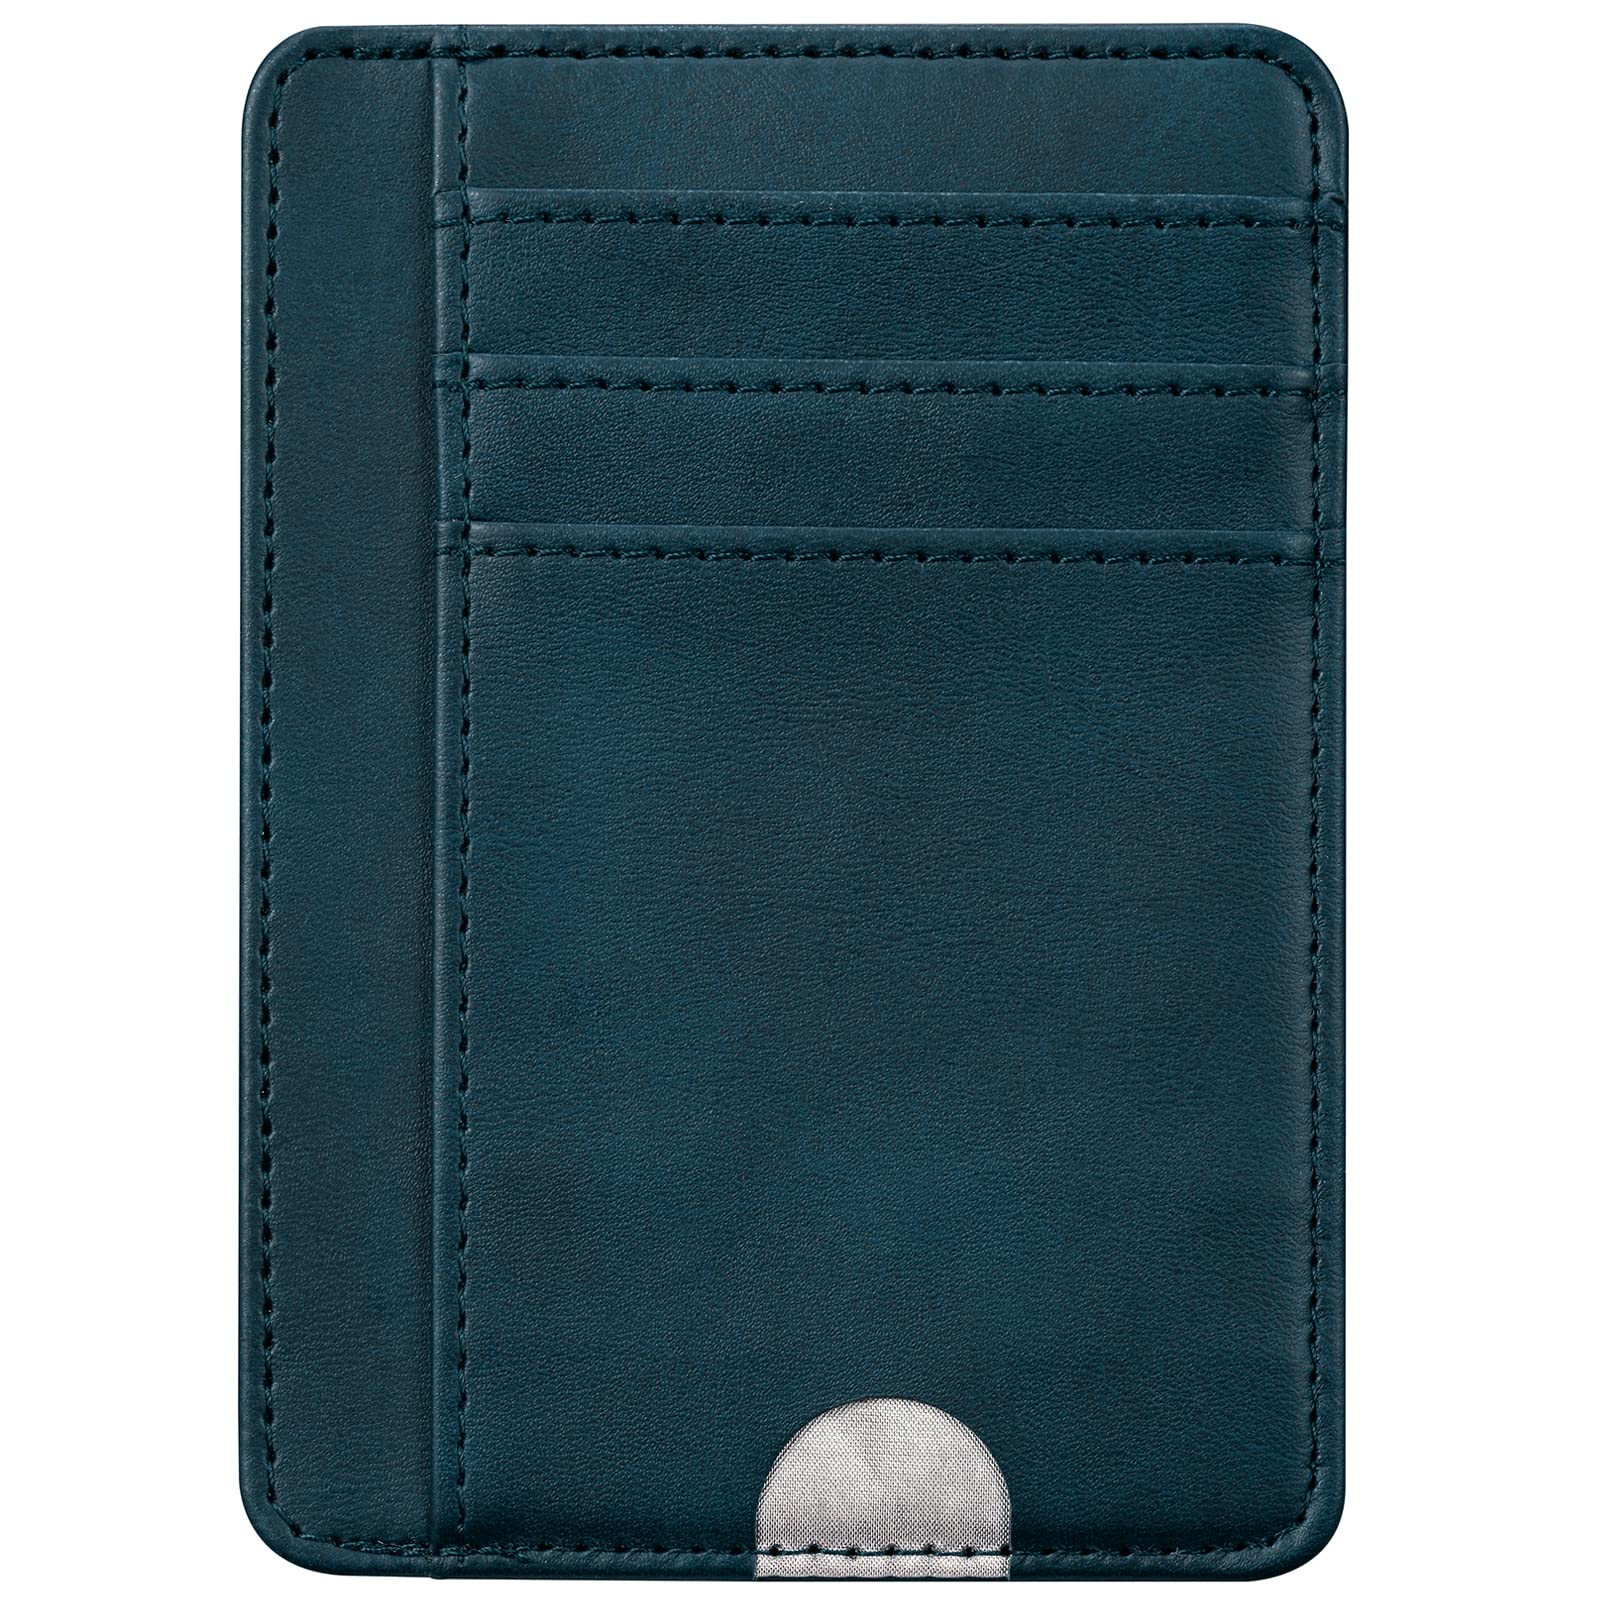 LIXUE TONGYE Launches Ultra Thin Wallet Minimalist Leather Men’s Card Holder Wallet